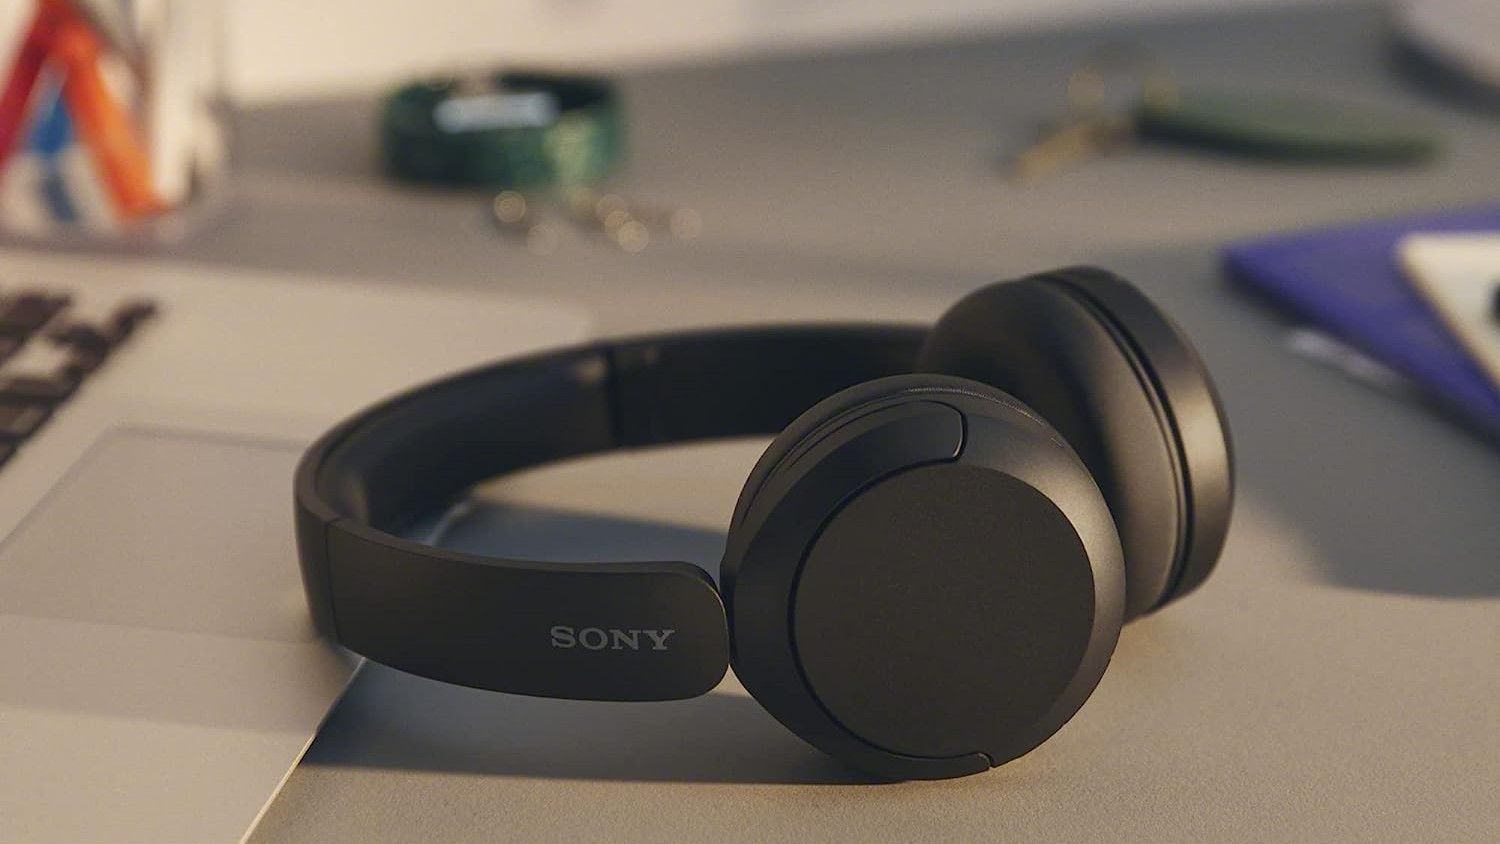 Sony WH-CH520L Wireless headphones on desk with blurred background